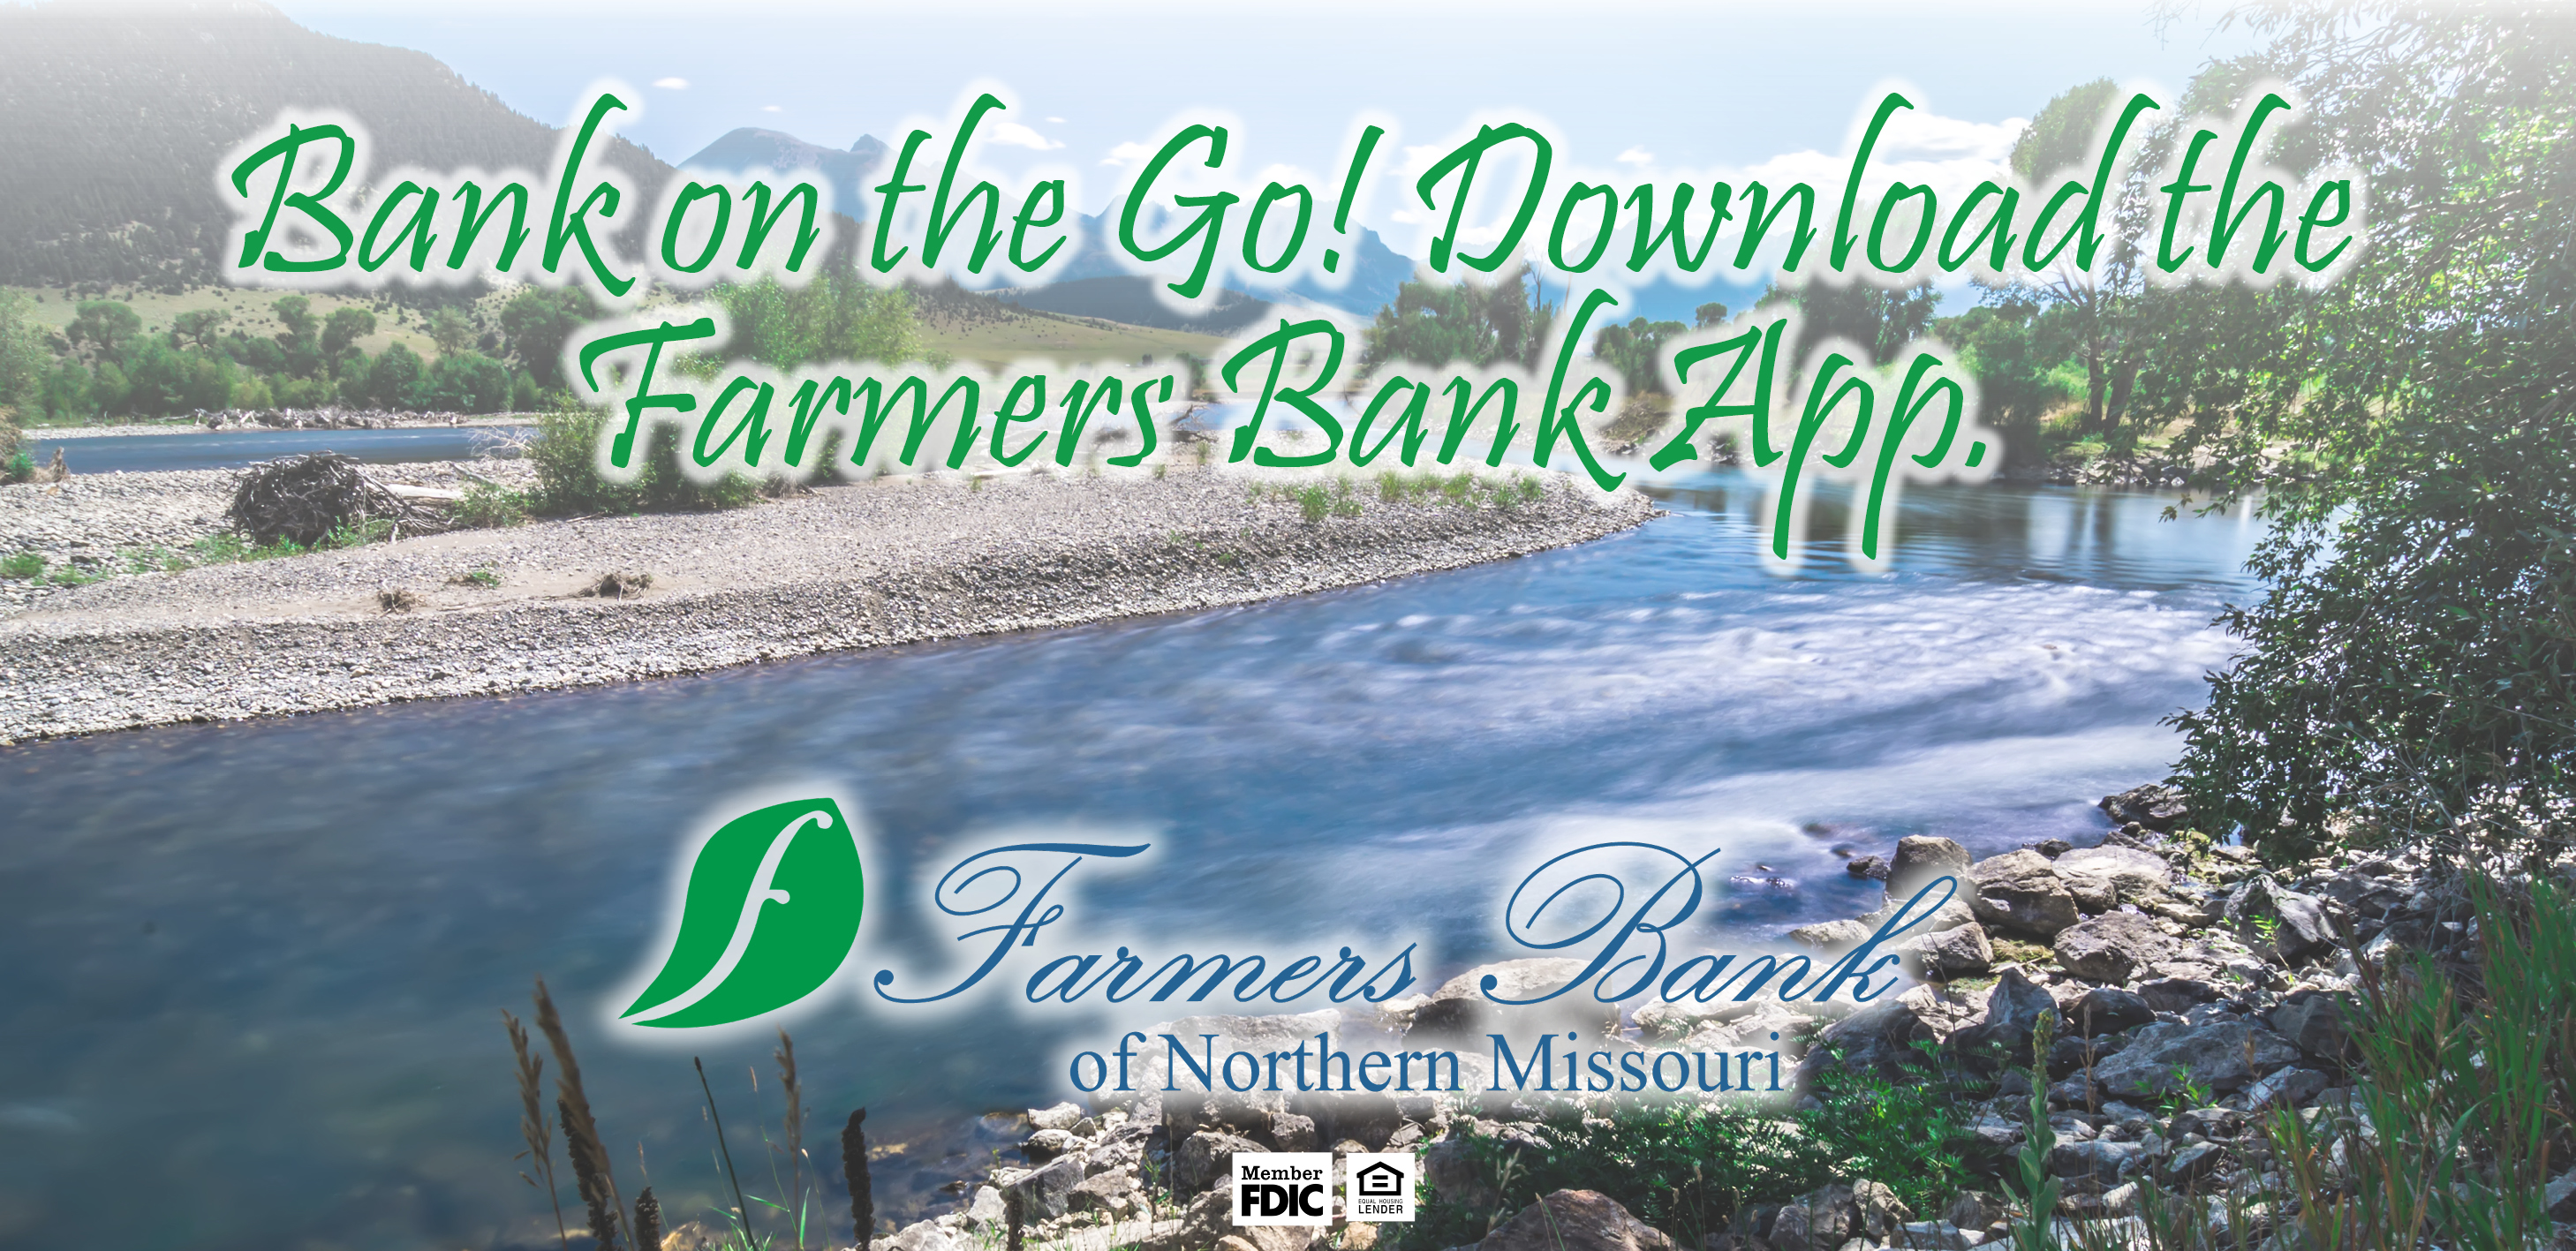 Bank on the GO. Download the Farmers Bank App. Farmers Bank of Northern Missouri, Member FDIC, Equal Housing Lender.